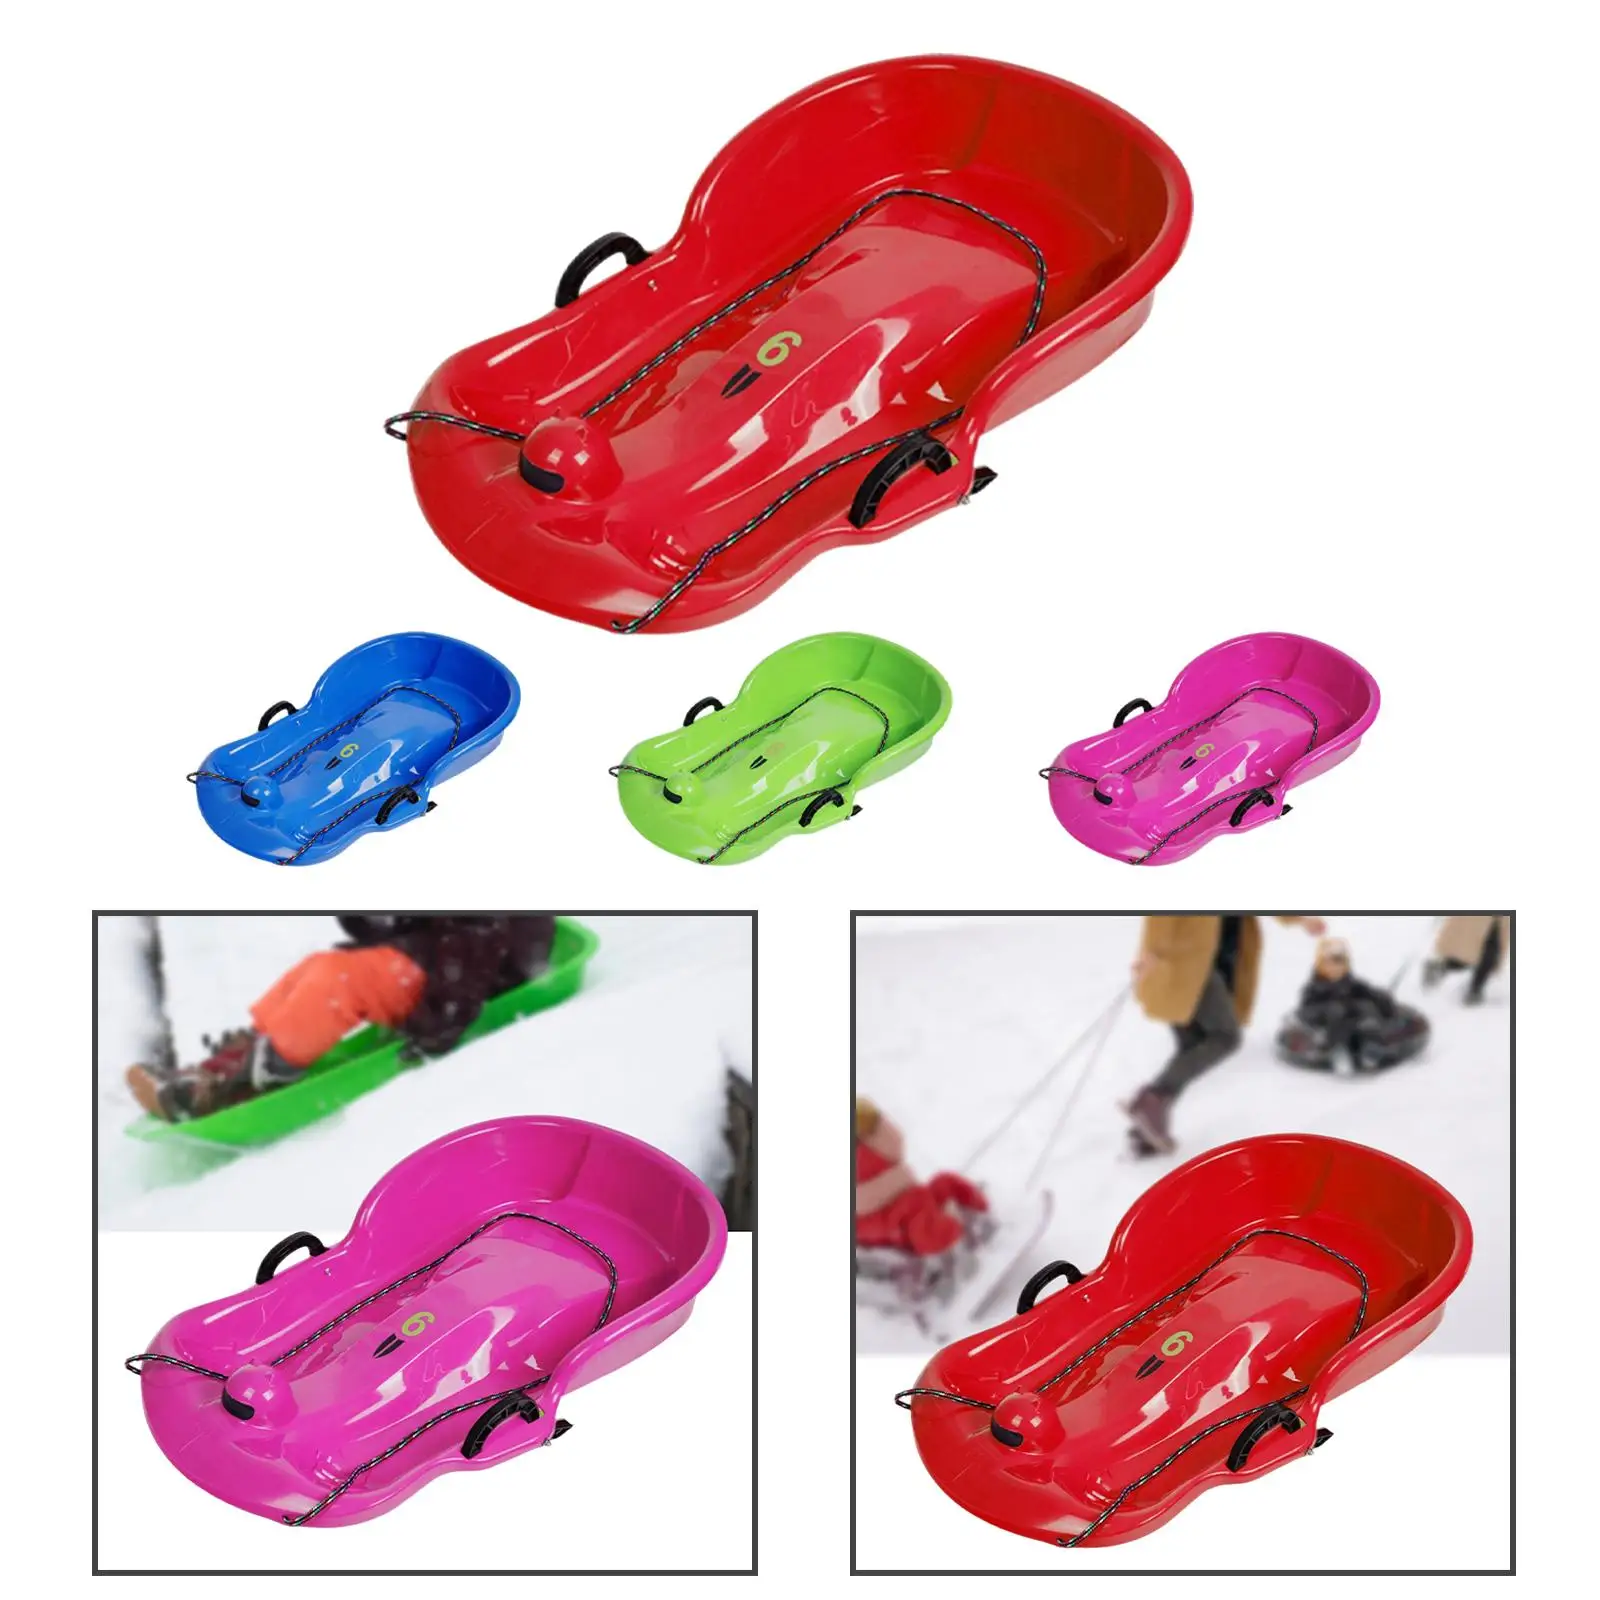 Portable Winter Snow Sled Sledding Sleigh Toboggan with Pull Rope Kids Sledge with Double Seat for Garden Outdoor Holiday Yard